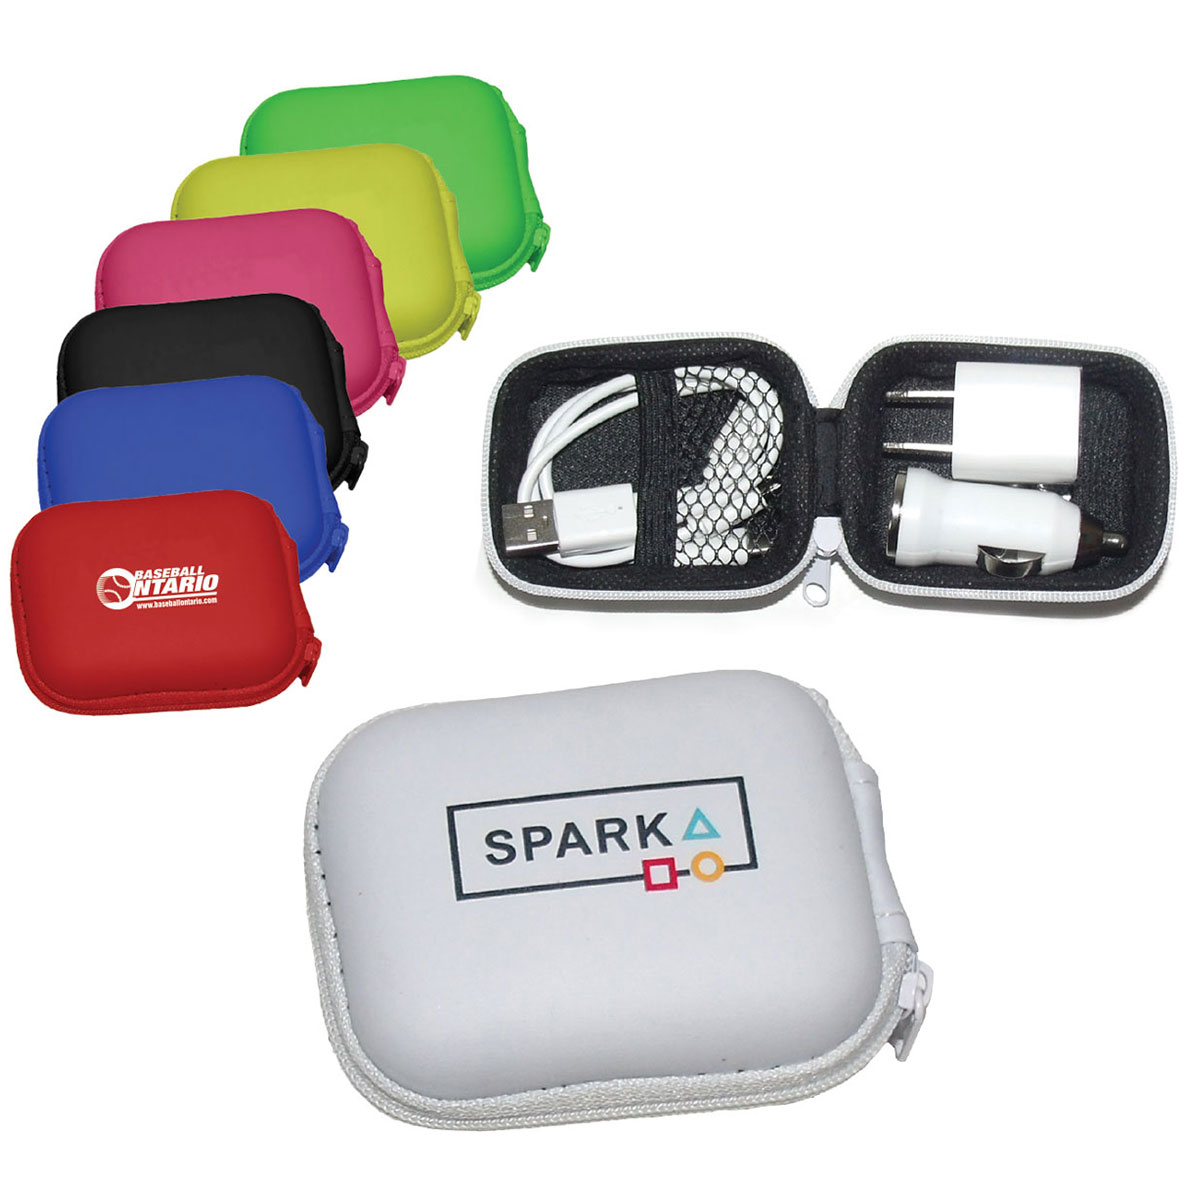 Travel Charger Gift Set